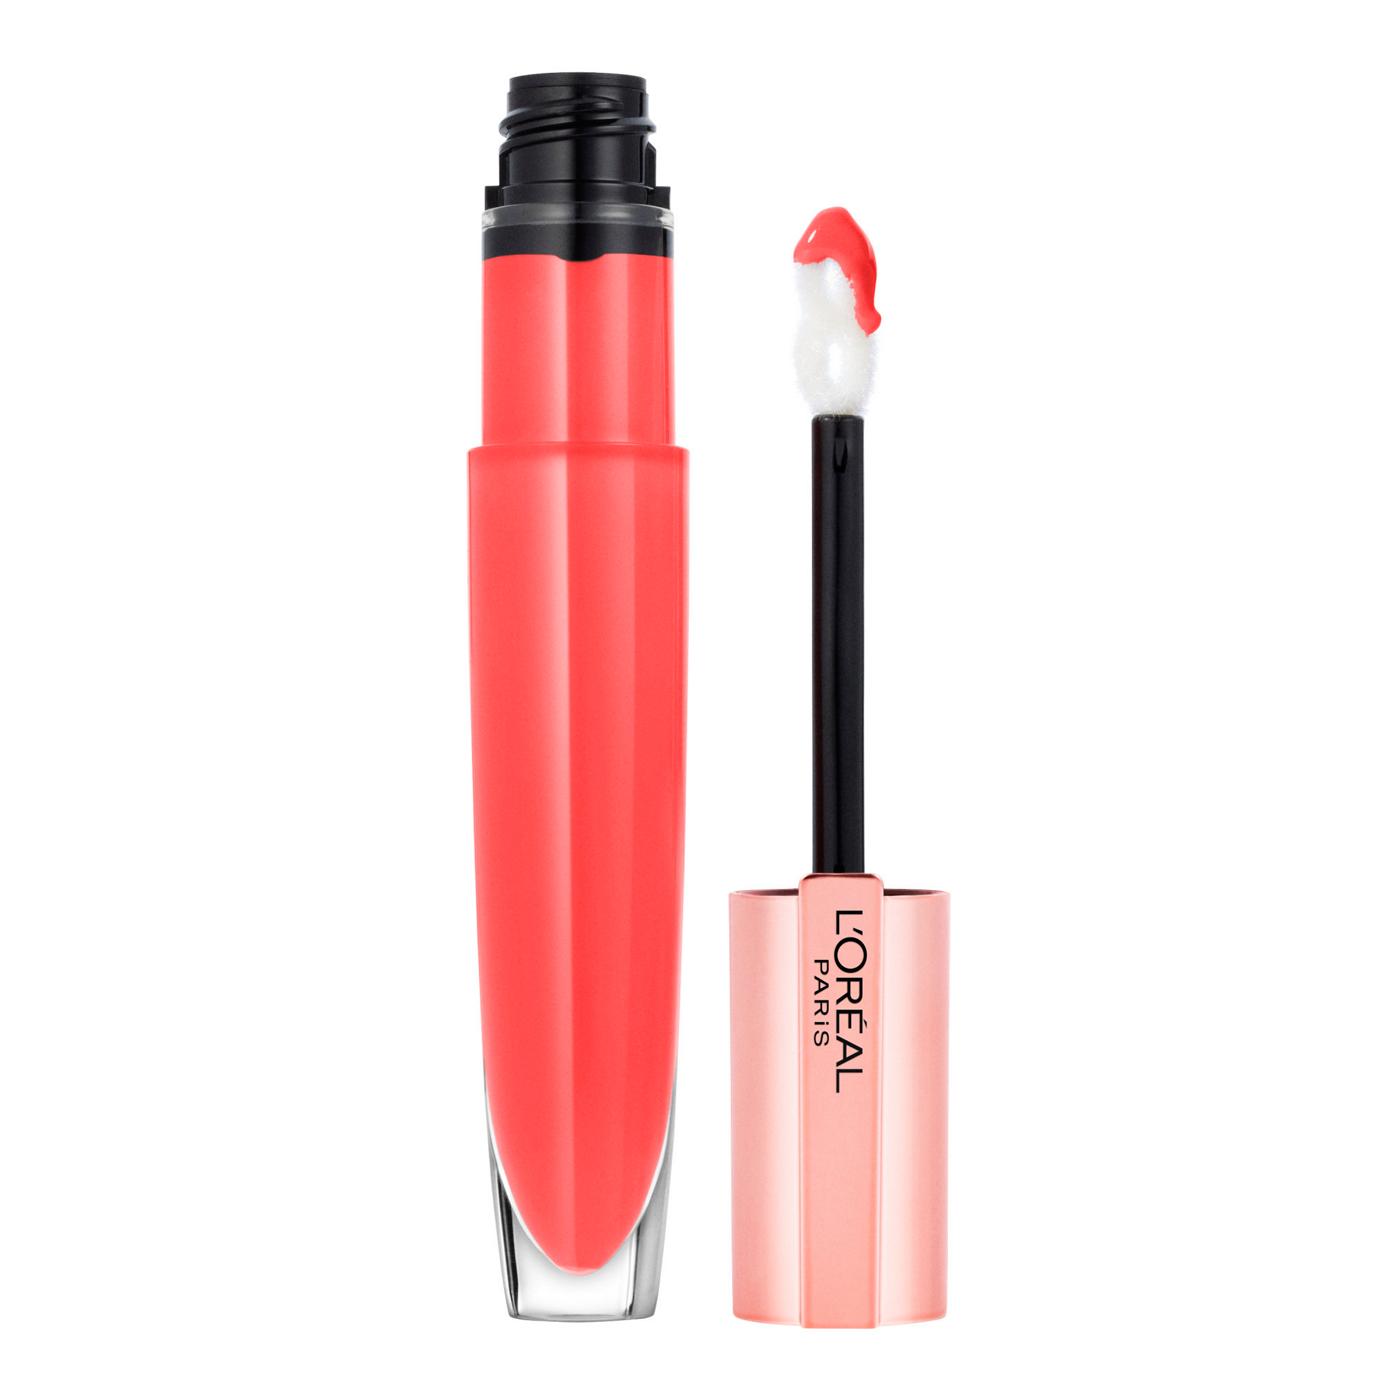 L'Oréal Paris Glow Paradise  Lip Balm-in-Gloss Pomegranate Extract Angelic Daydream; image 1 of 6